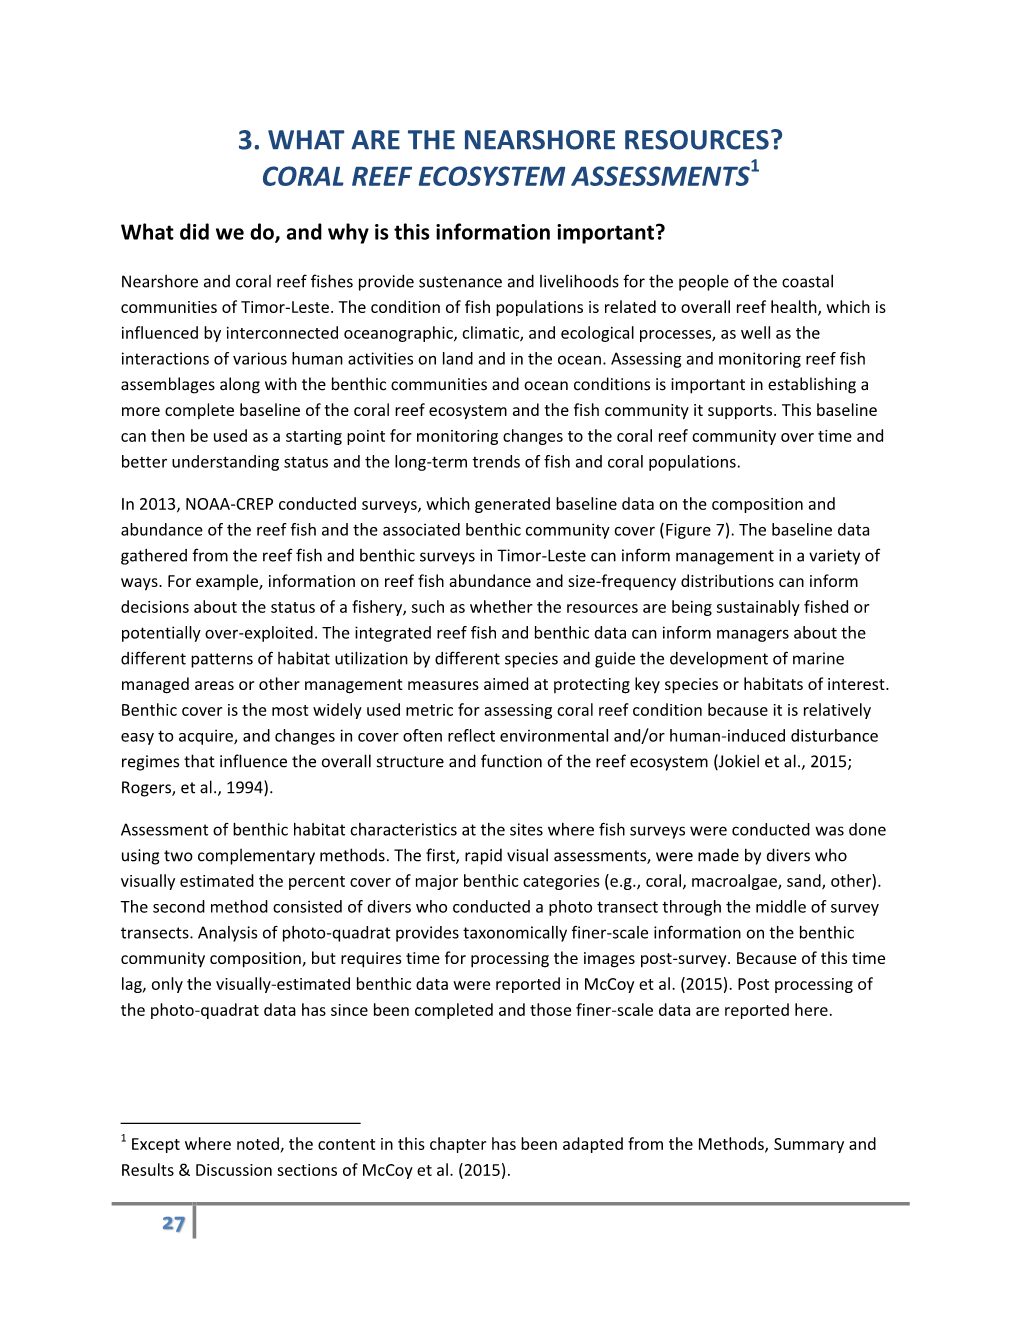 Coral Reef Ecosystem Assessments1